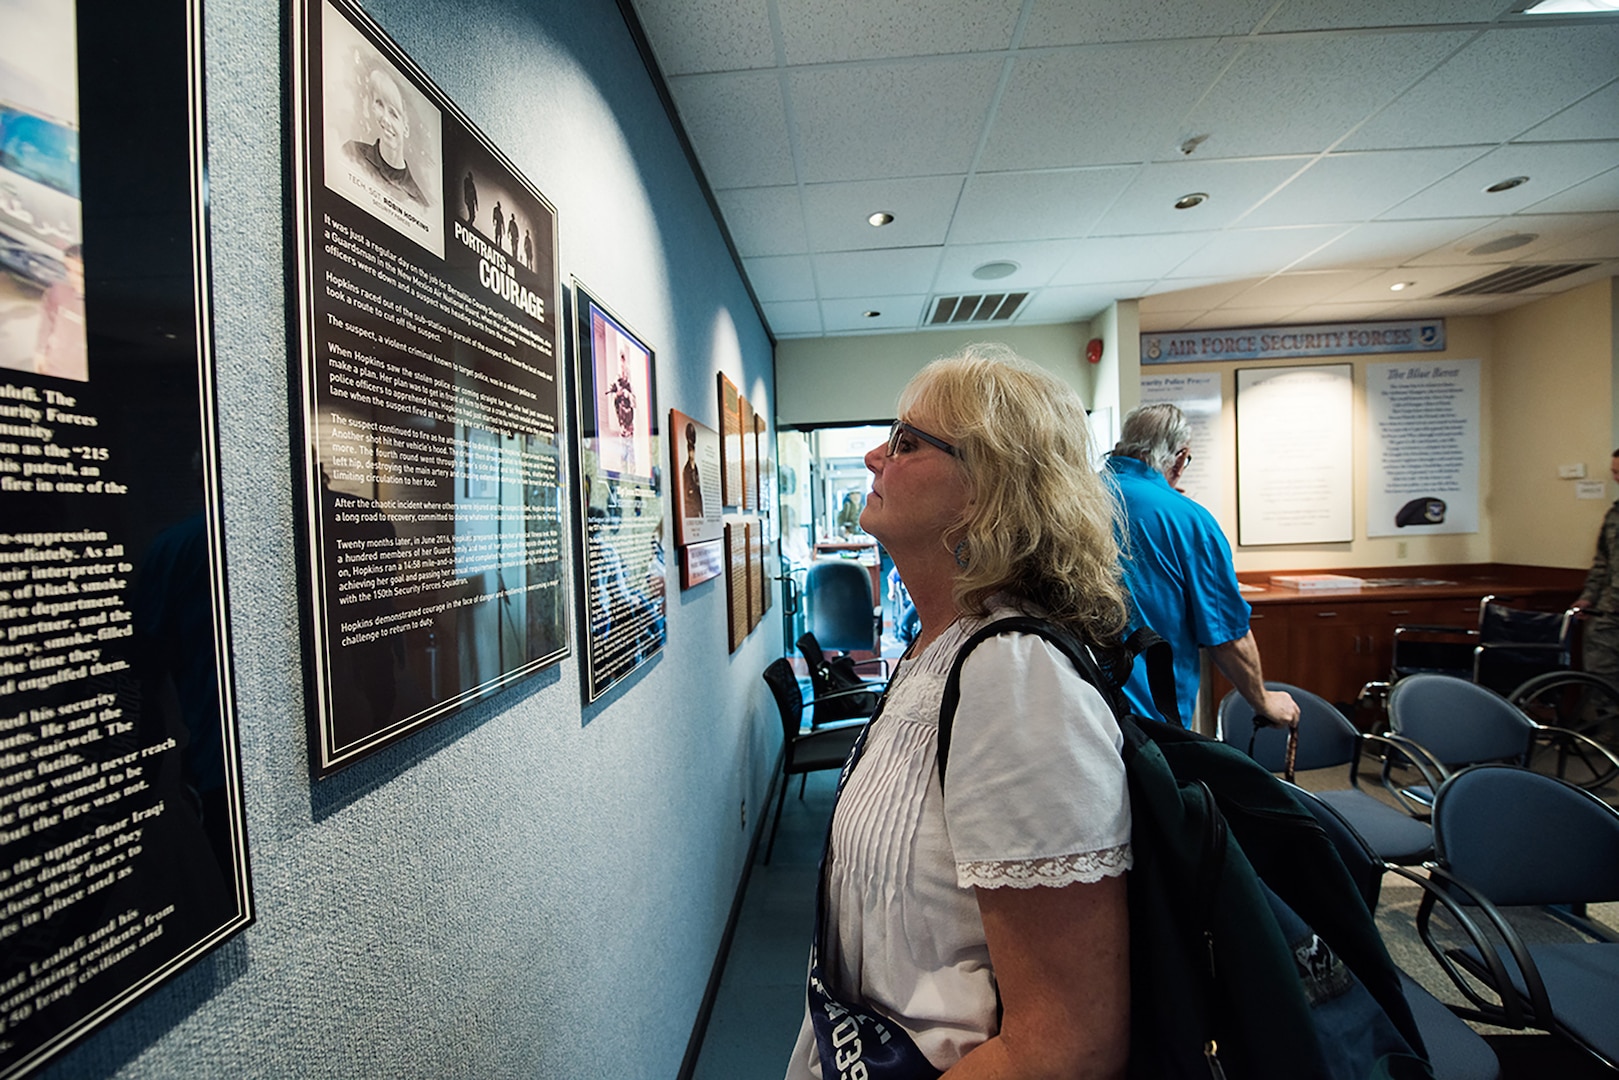 The women of flight W039, 3707th Squadron, of 1979, tour the Security Forces Museum Foundation, Oct. 18, 2019, at Joint Base San Antonio-Lackland, Texas.